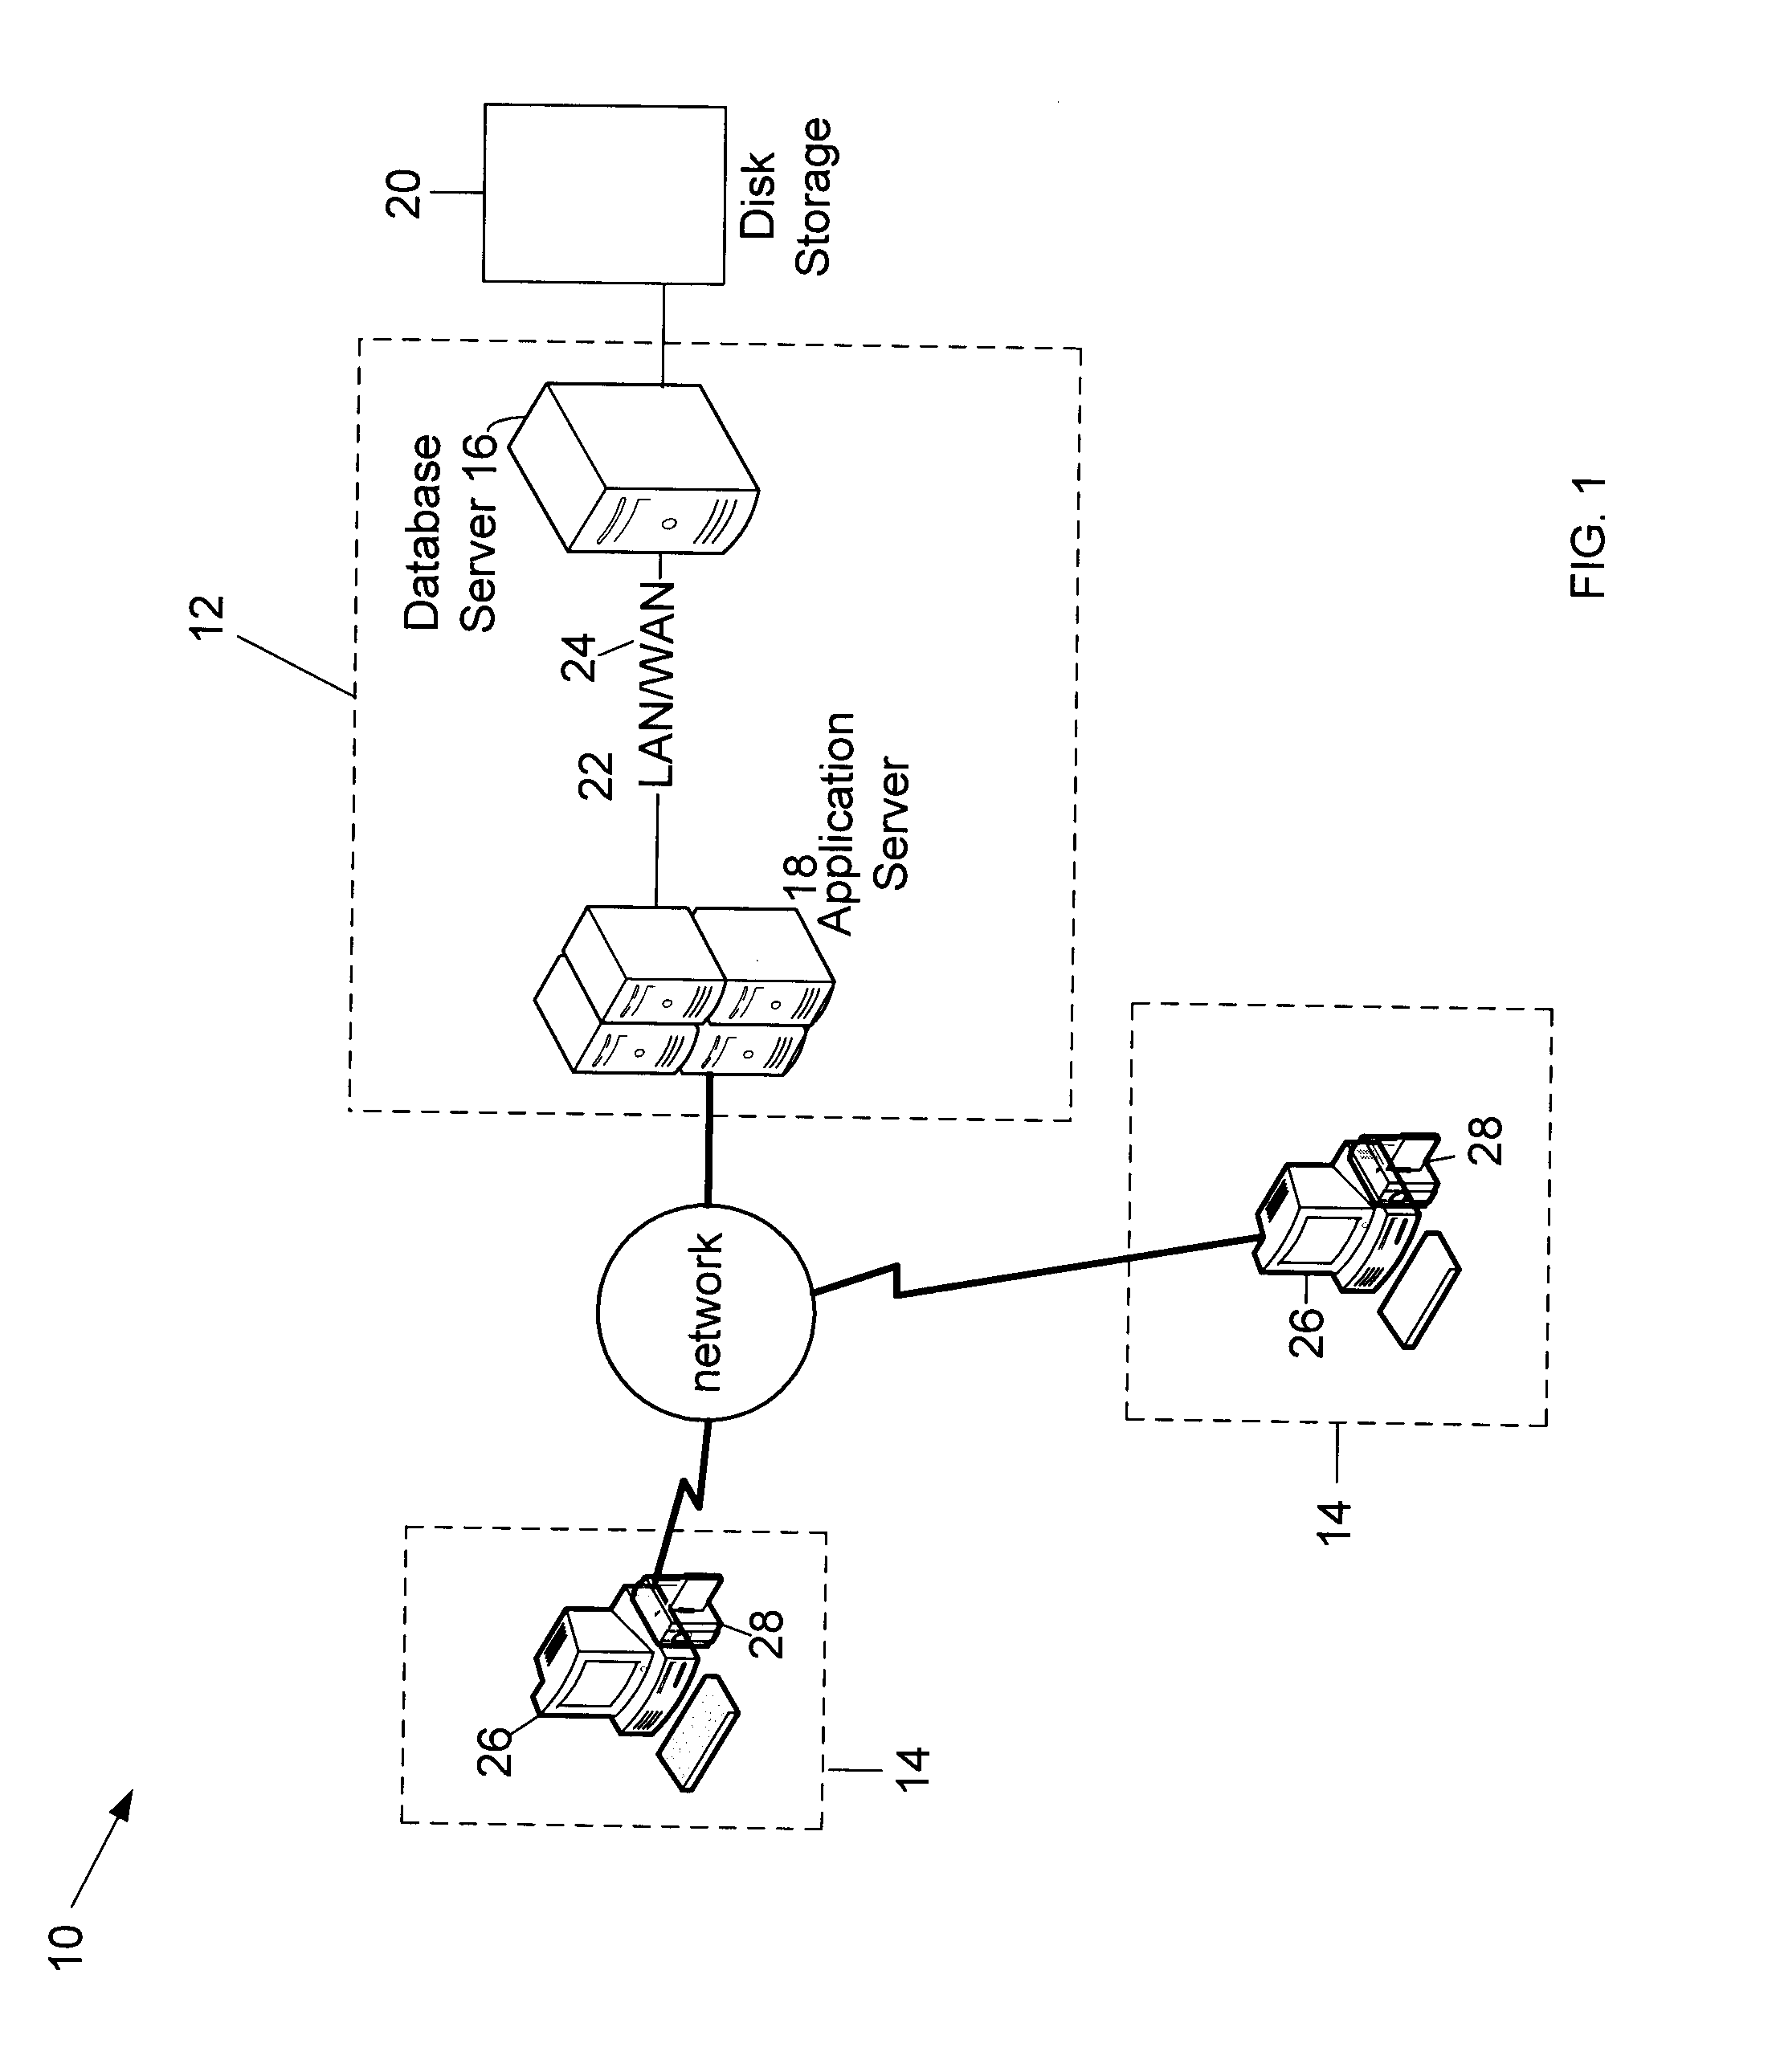 Method and system of accounting for positional variability of biometric features